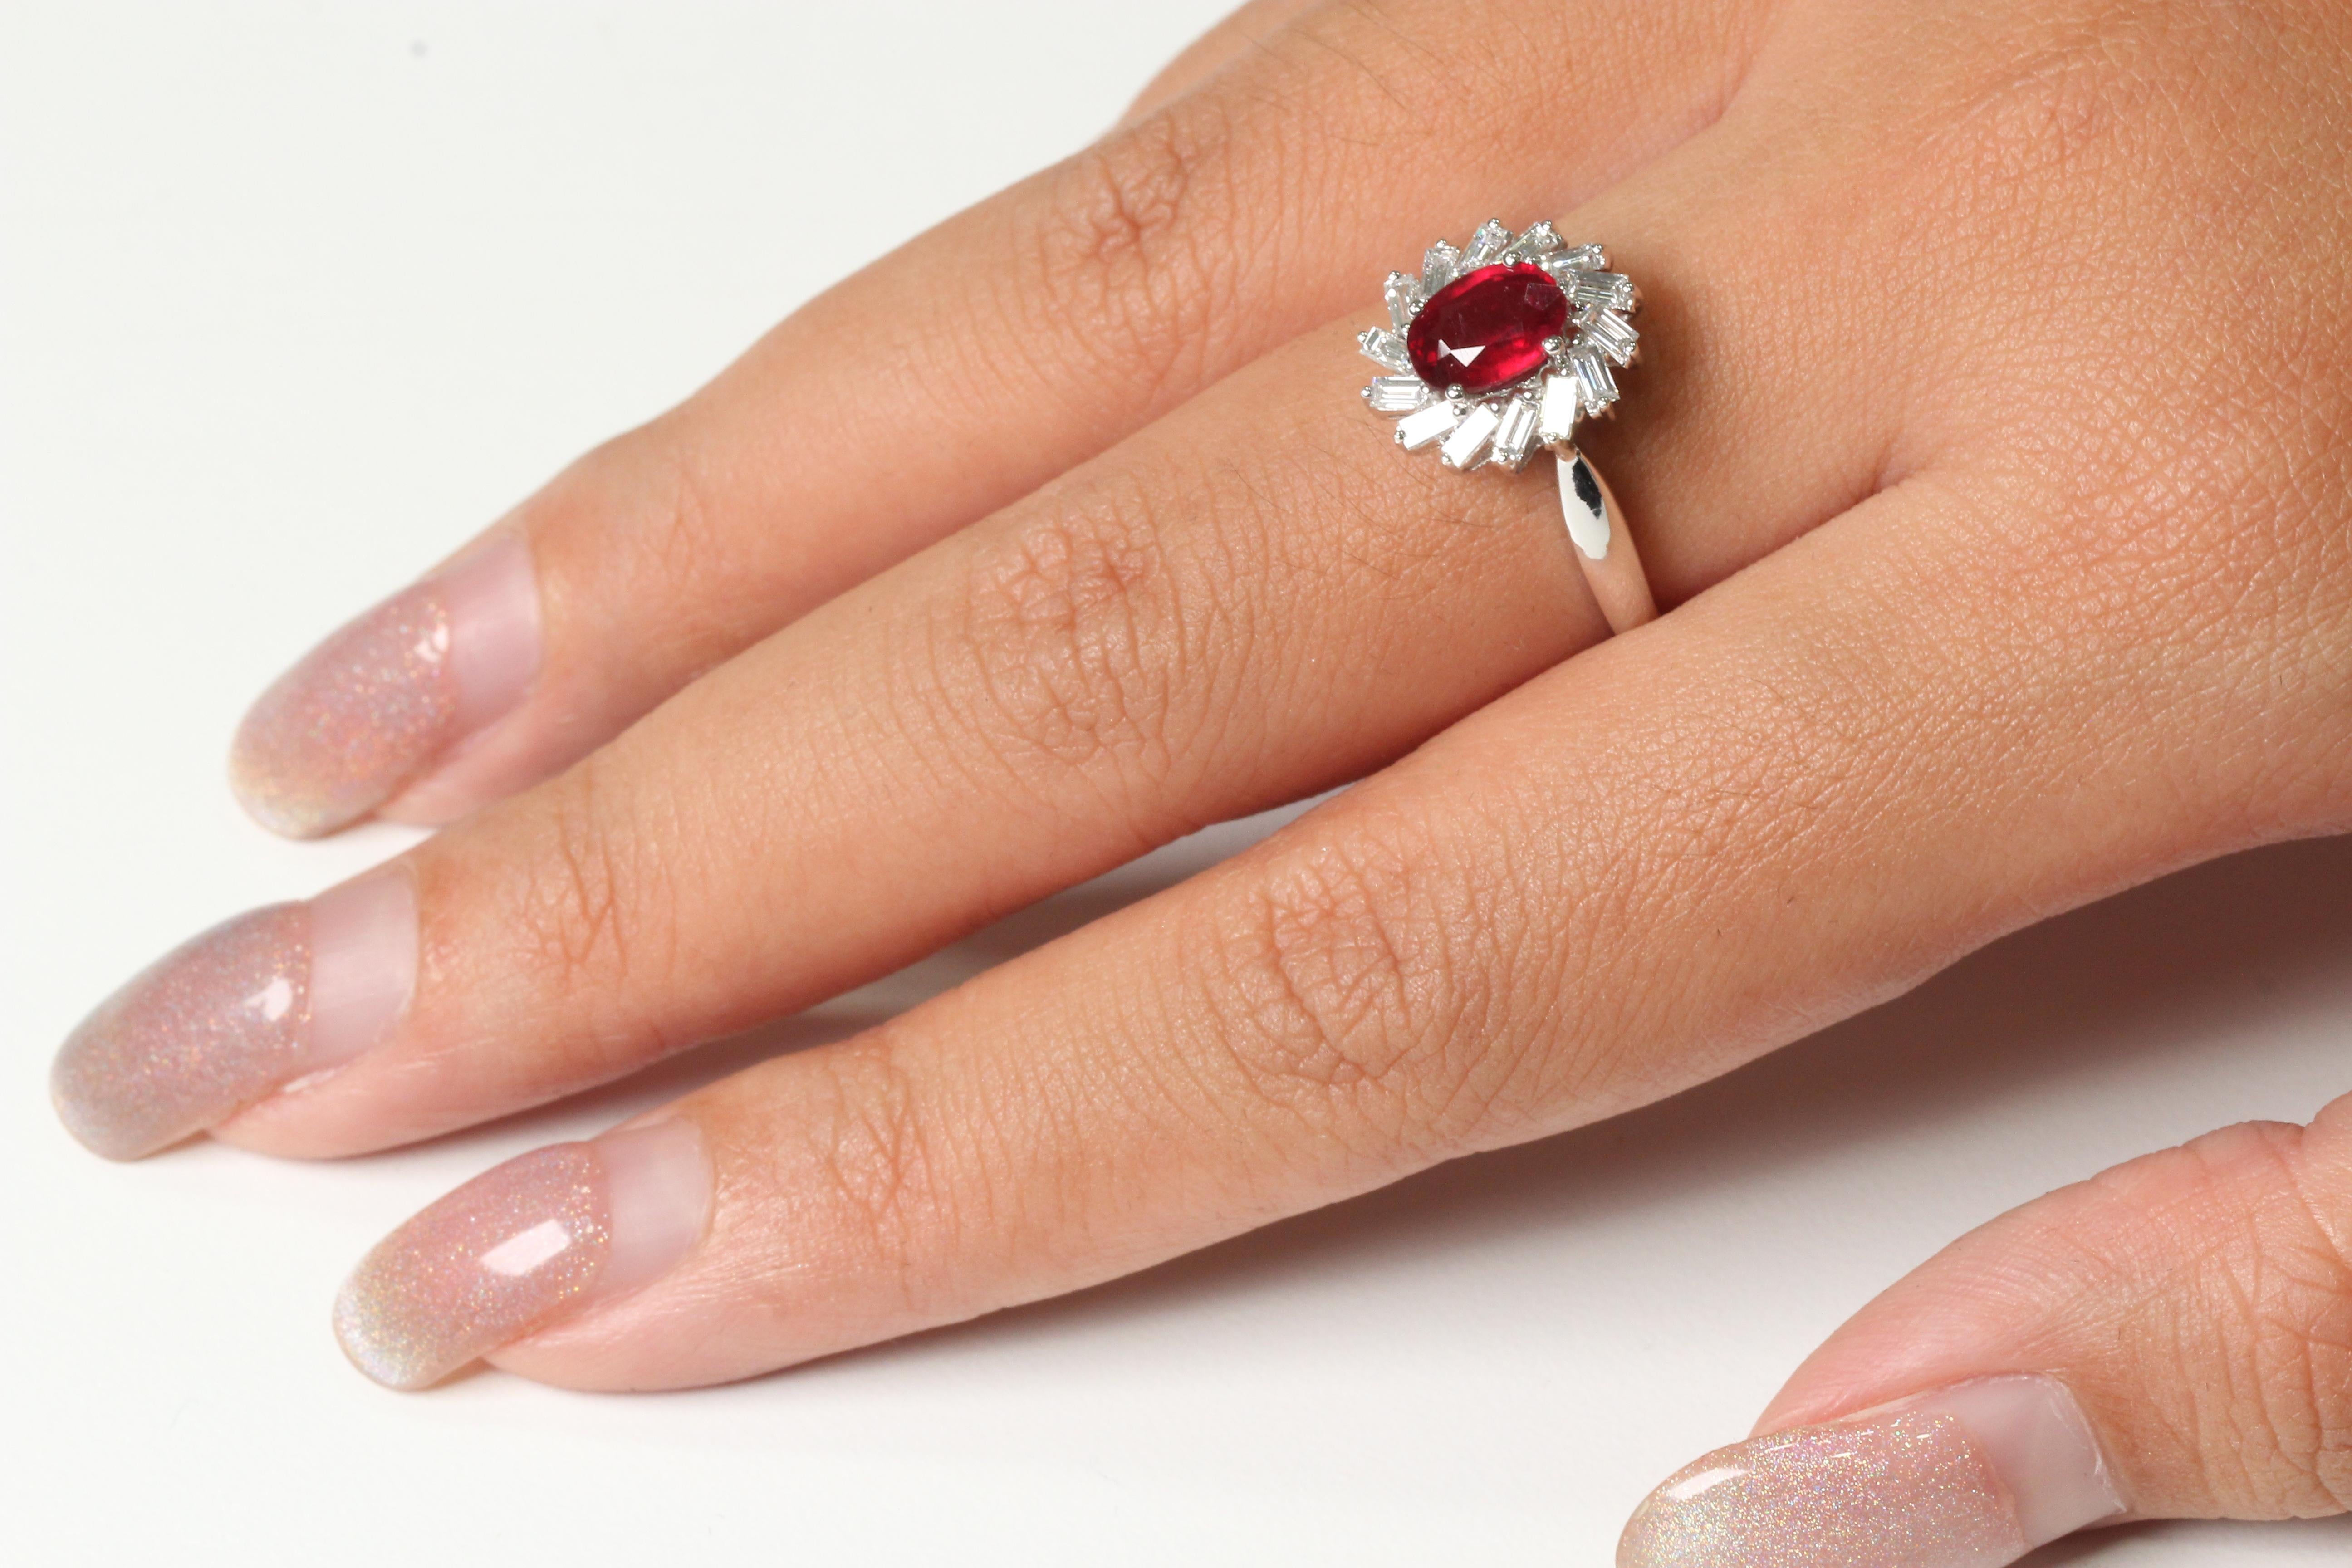  With this ring, you can be sure to grab everyone's attention. This piece is made up of a glass filled ruby stone and diamond stones in an antique style setting. The combination of these materials and the design of this ring make it stand out from